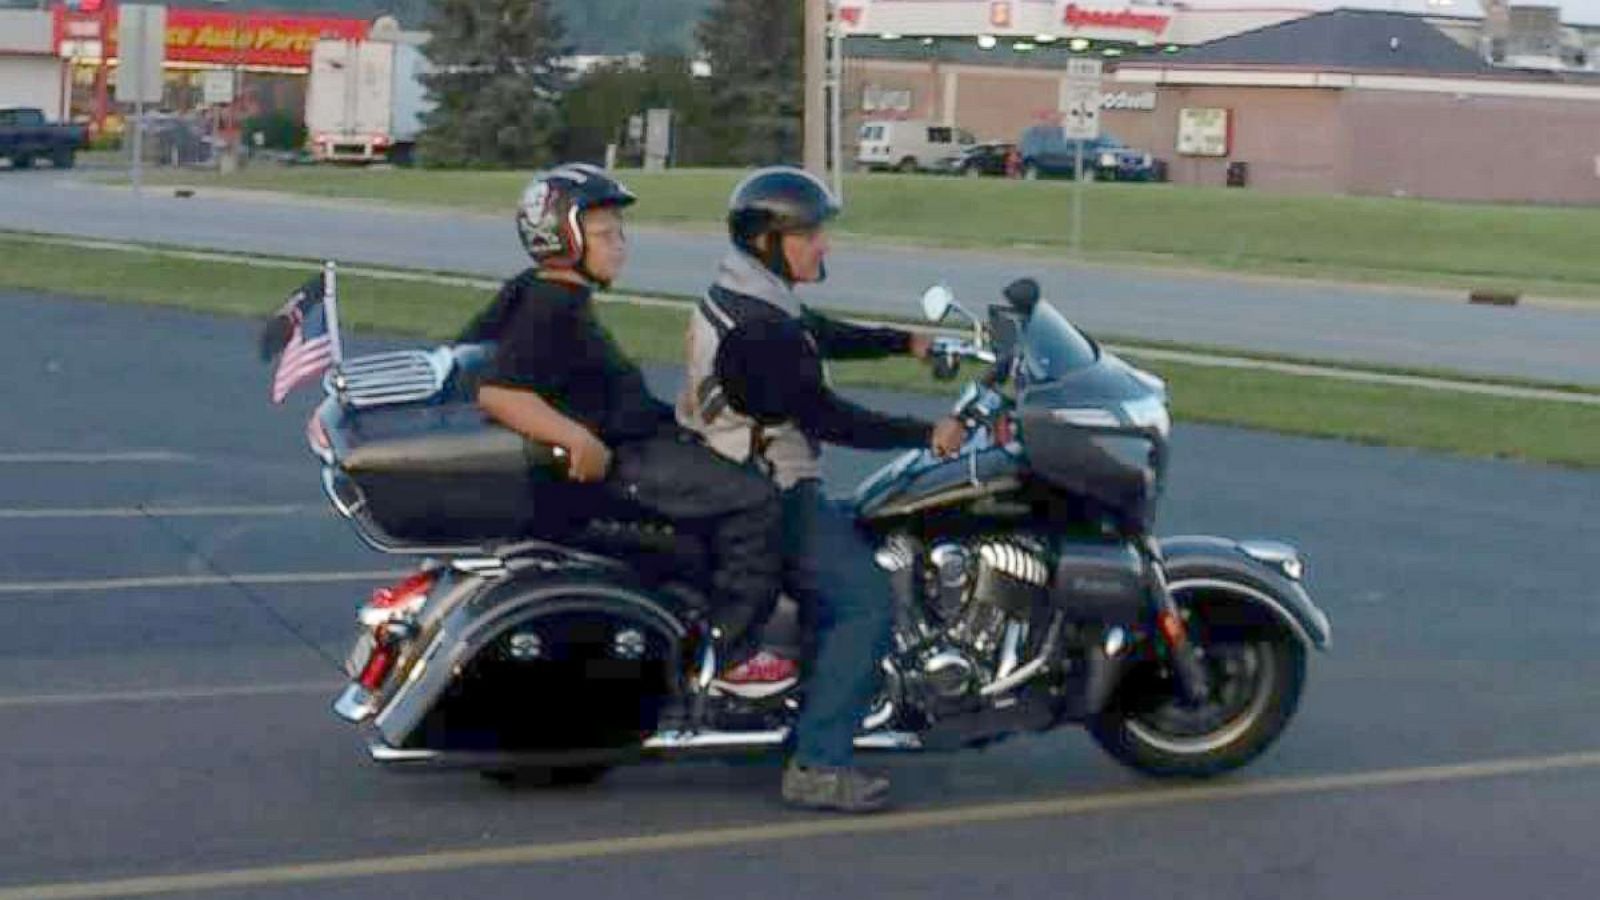 Phil riding on the back of one of the bikers named Brett Warfield on his way to school.